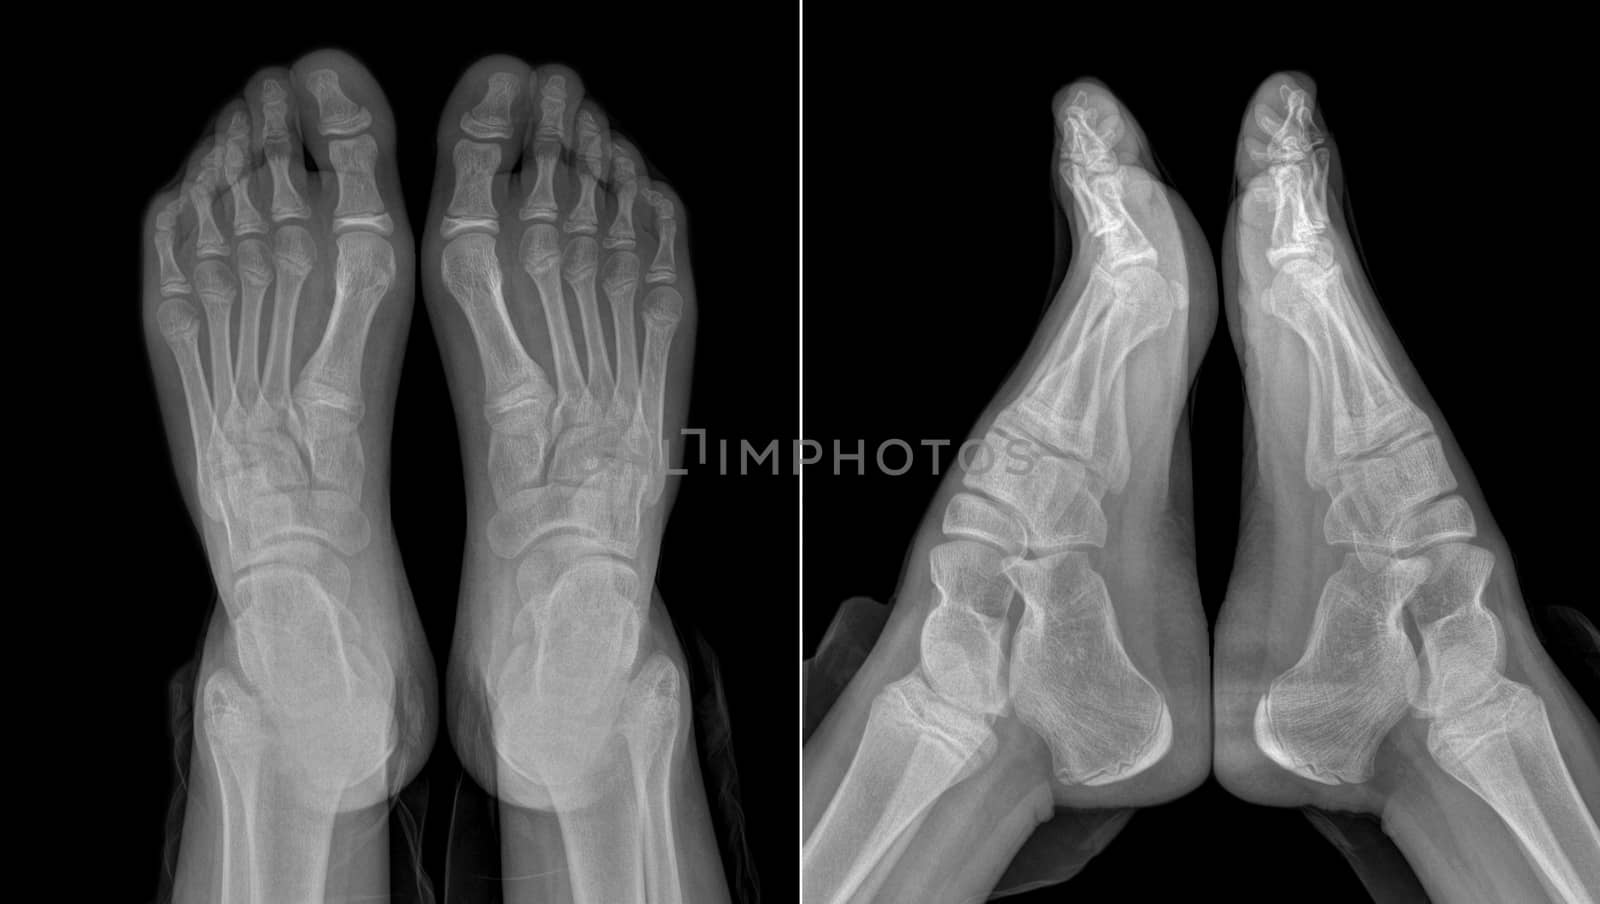 X-ray image of the girl's feet (two views with partially outline by dsmsoft